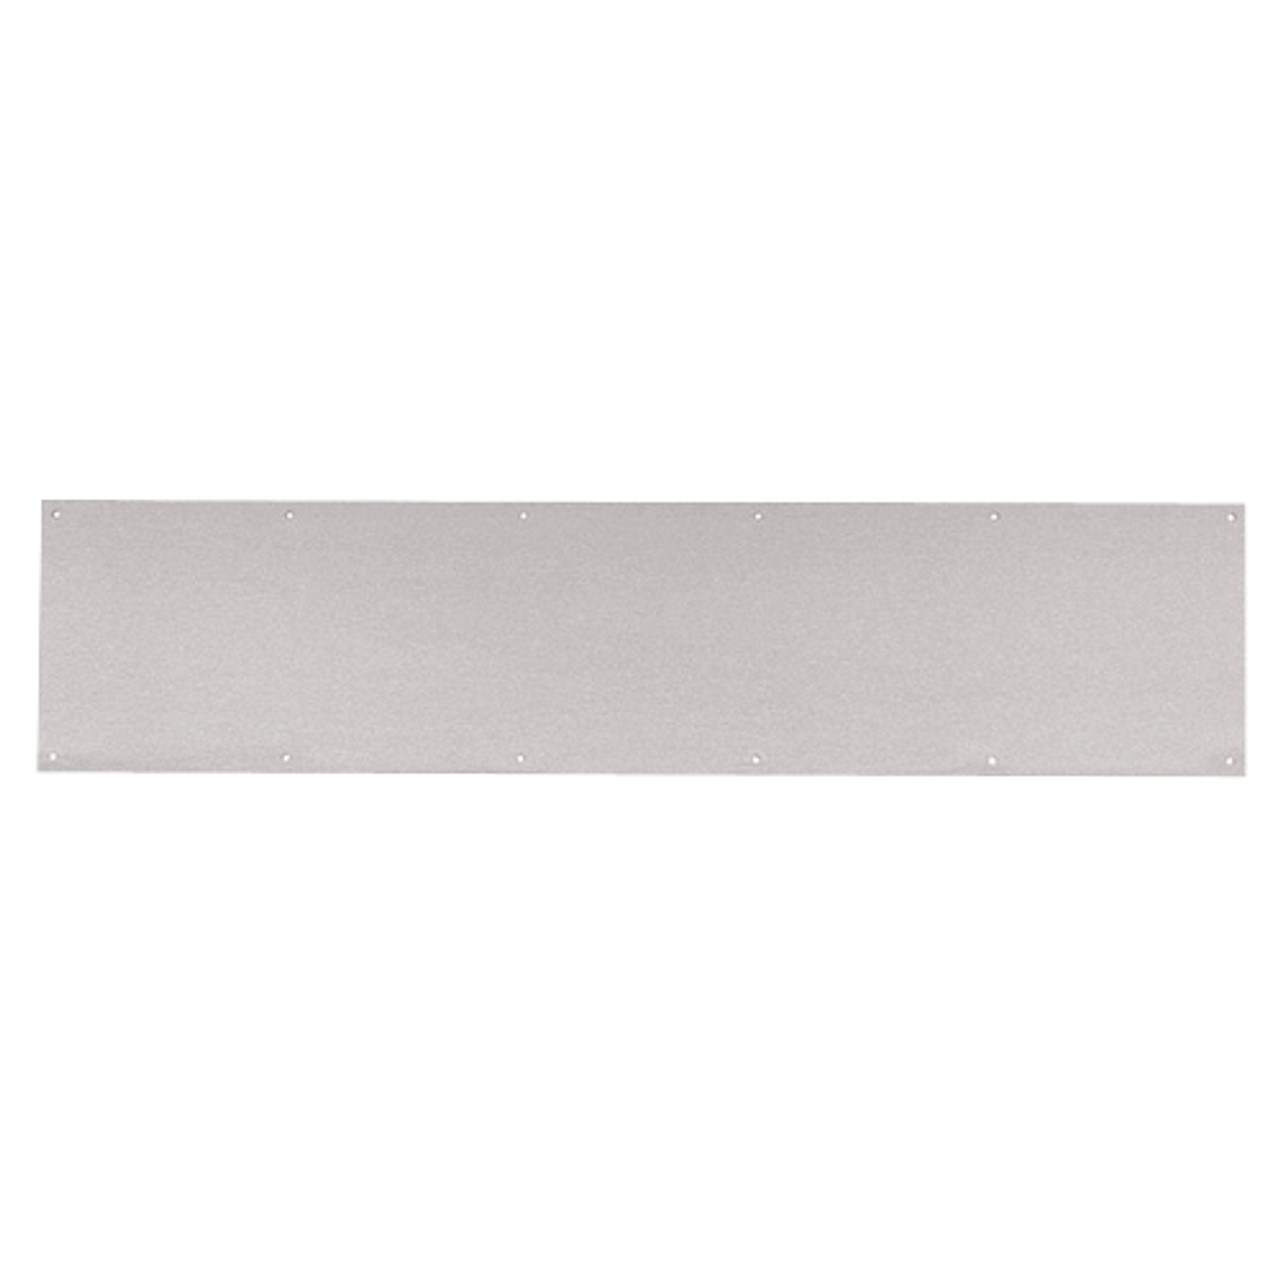 8400-US32D-6x46-B-CS Ives 8400 Series Protection Plate in Satin Stainless Steel